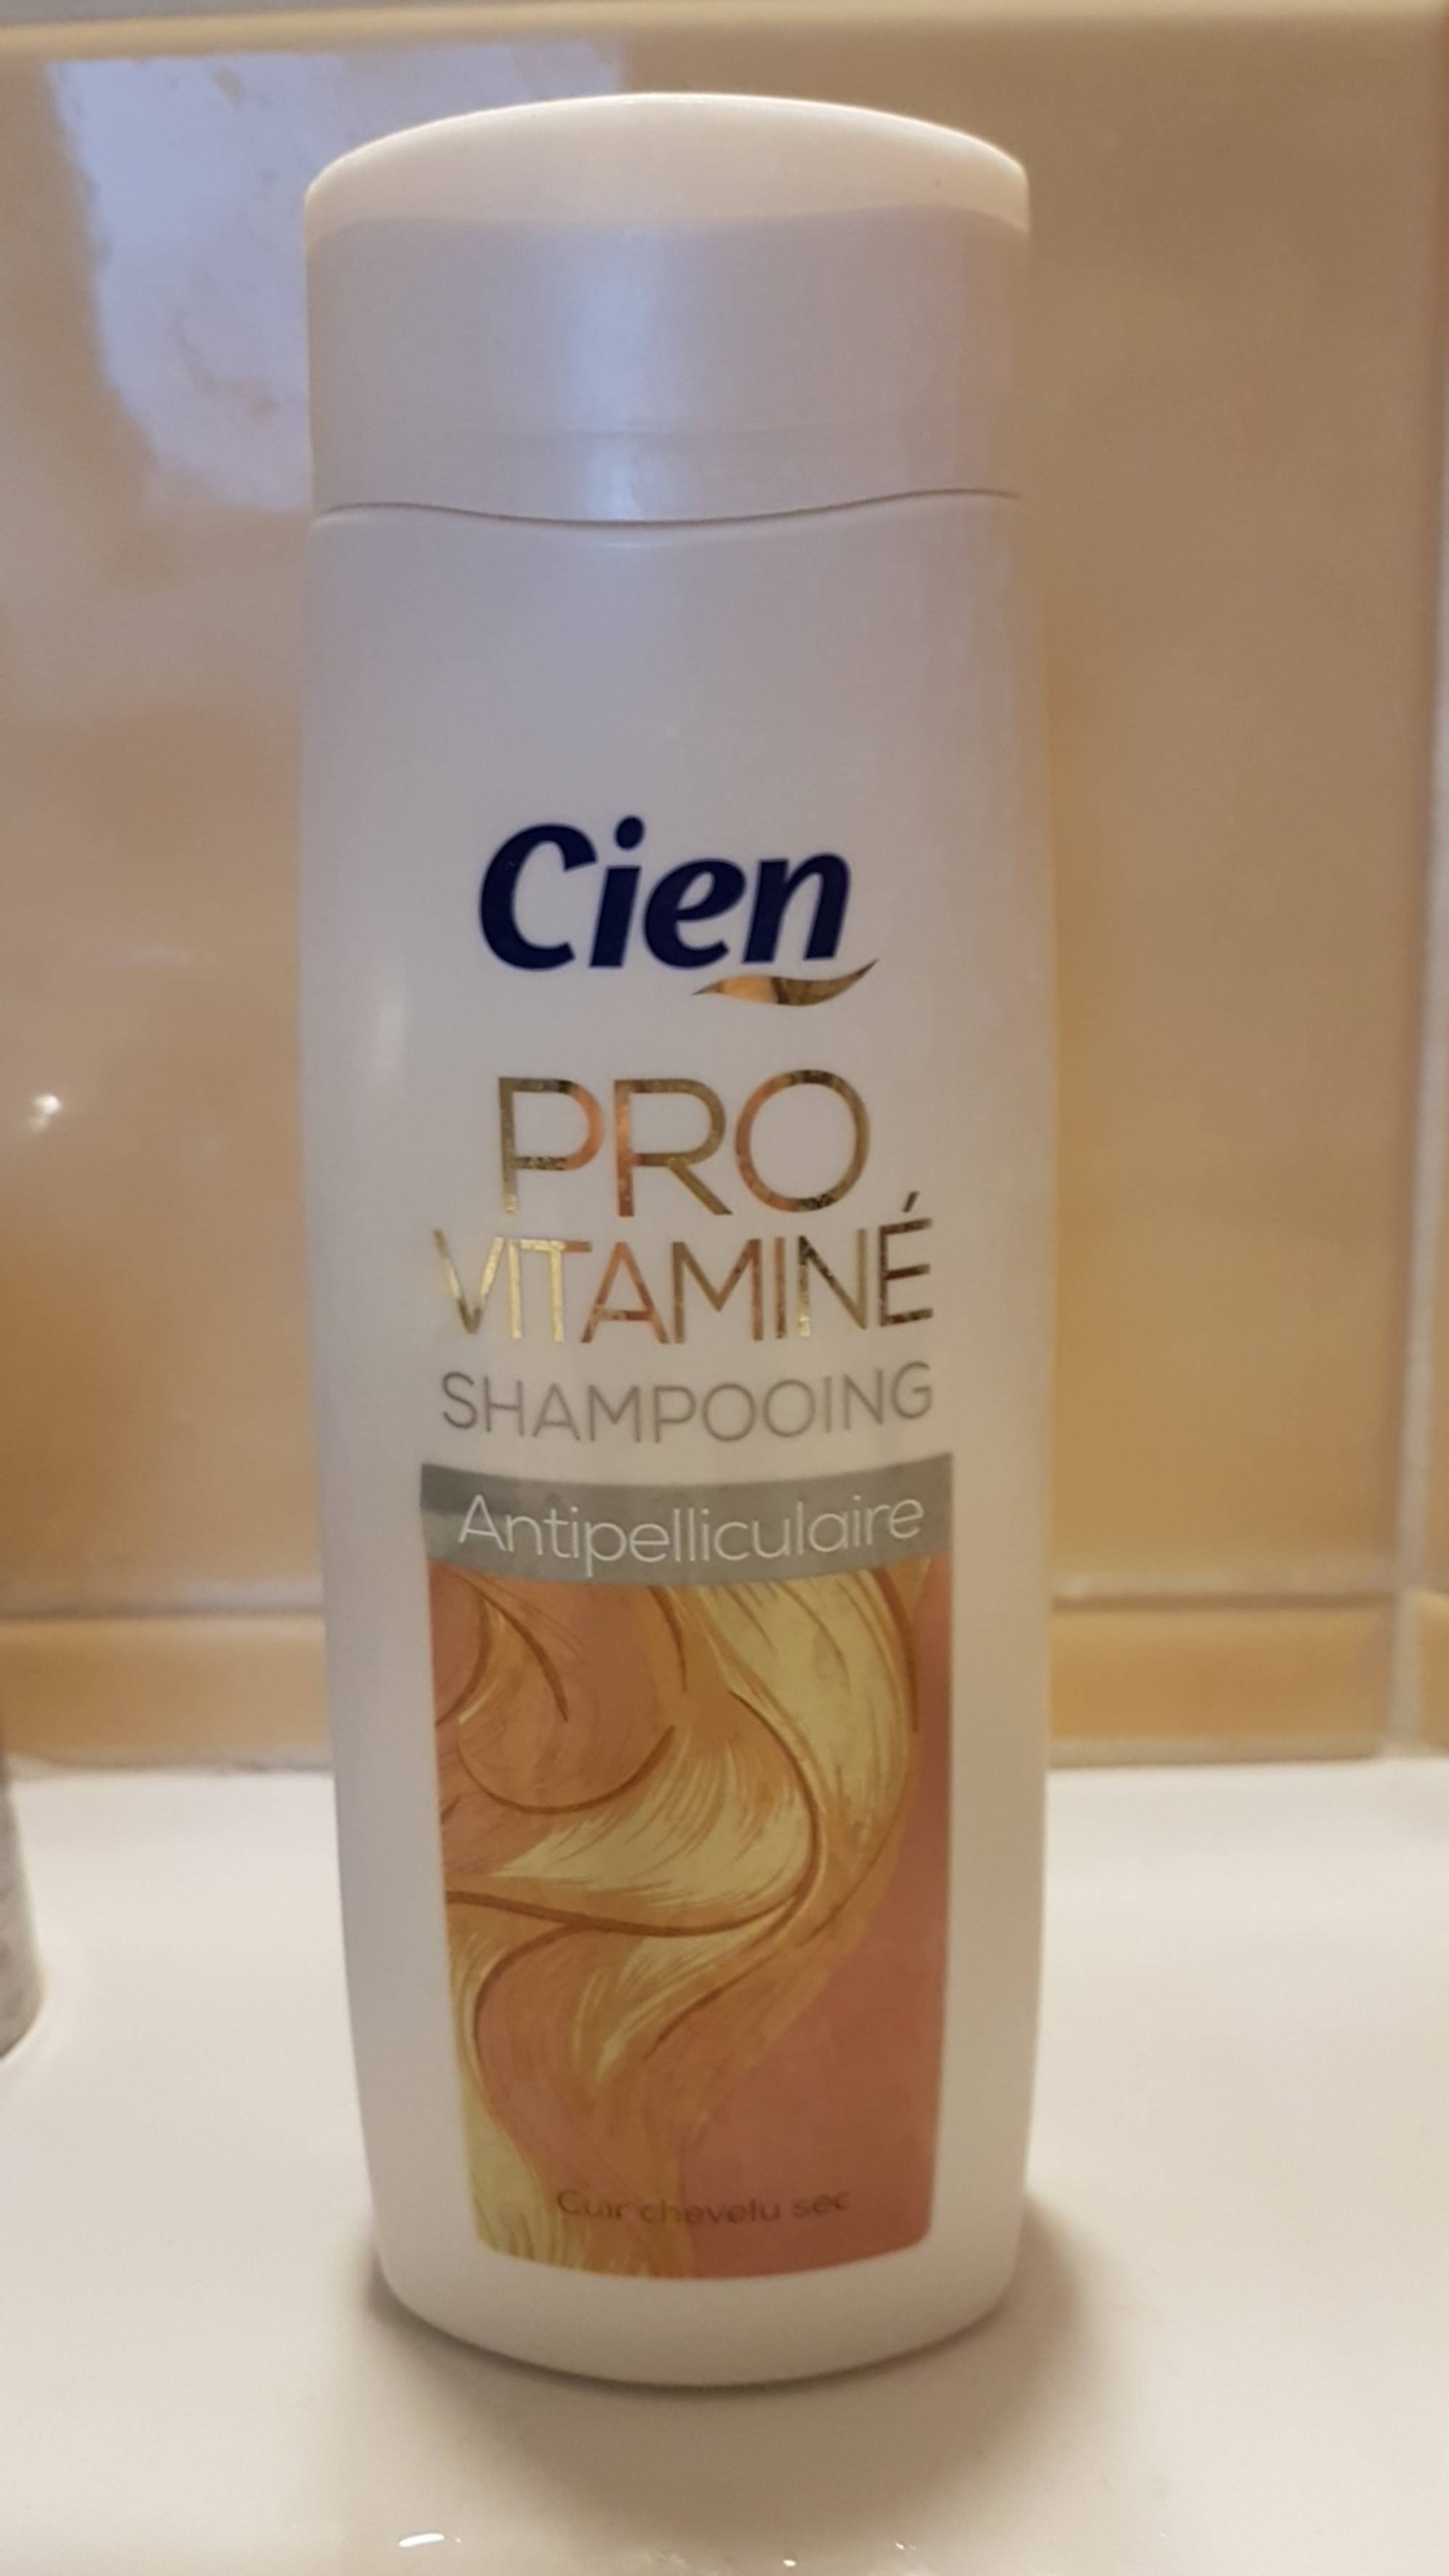 CIEN - Pro vitaminé - Shampooing antipelliculaire